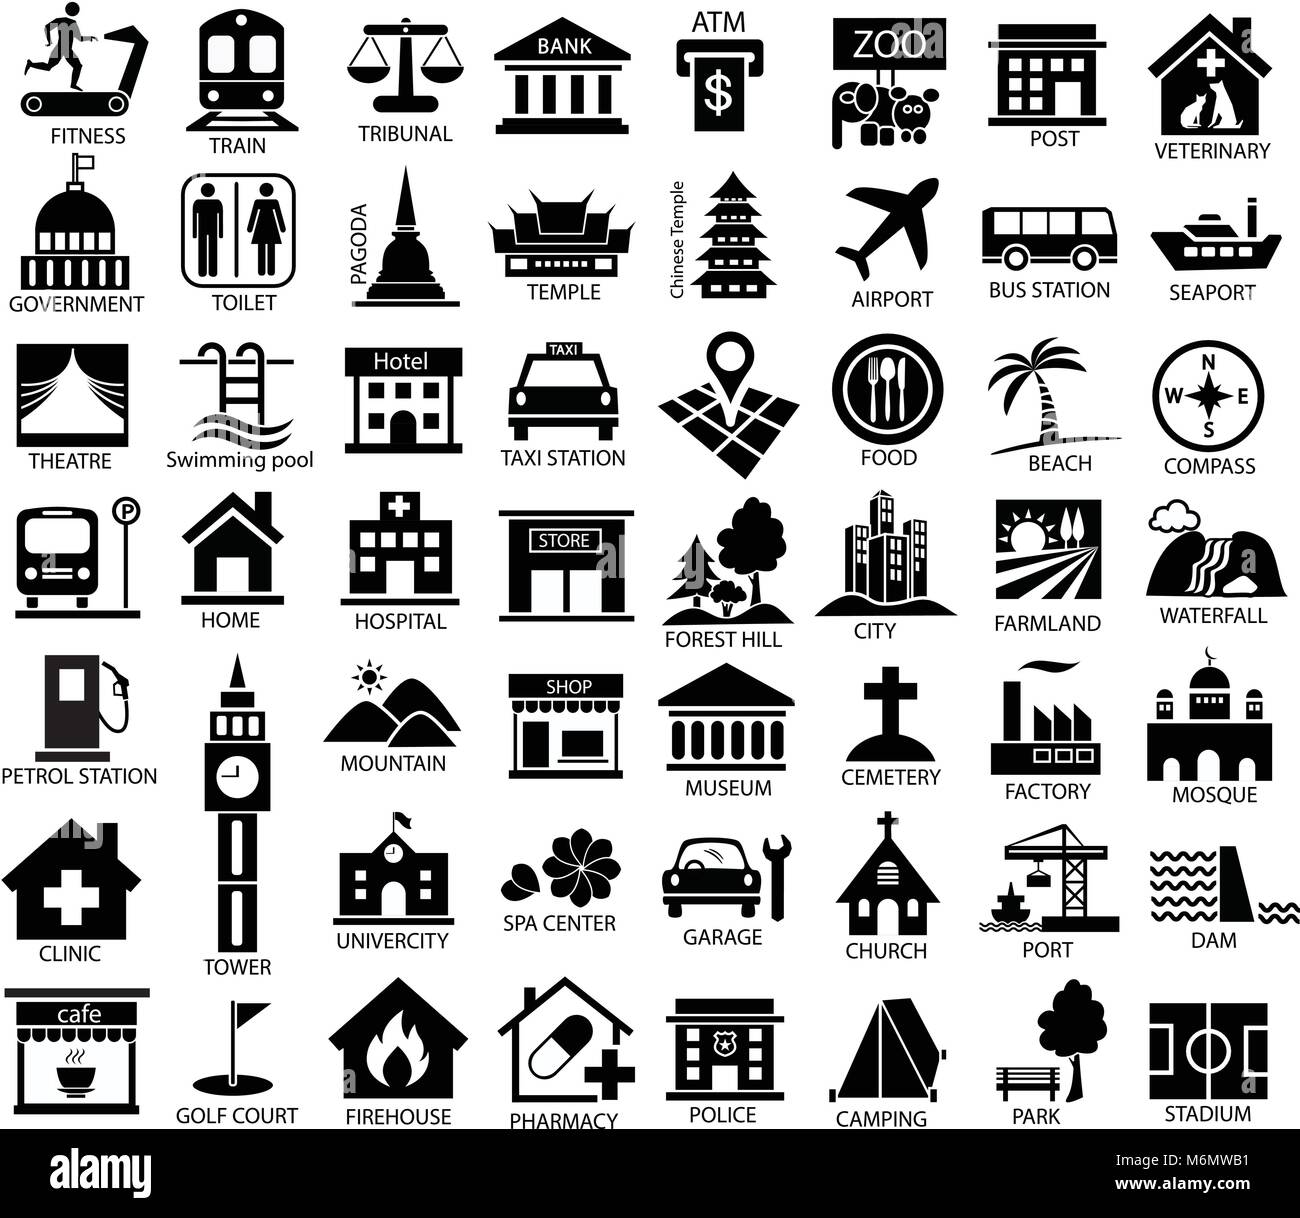 map symbol icon set, place of government, official, religious, cabaret, public health, travel, transport, relaxation, museum, airport, hospital, stati Stock Vector